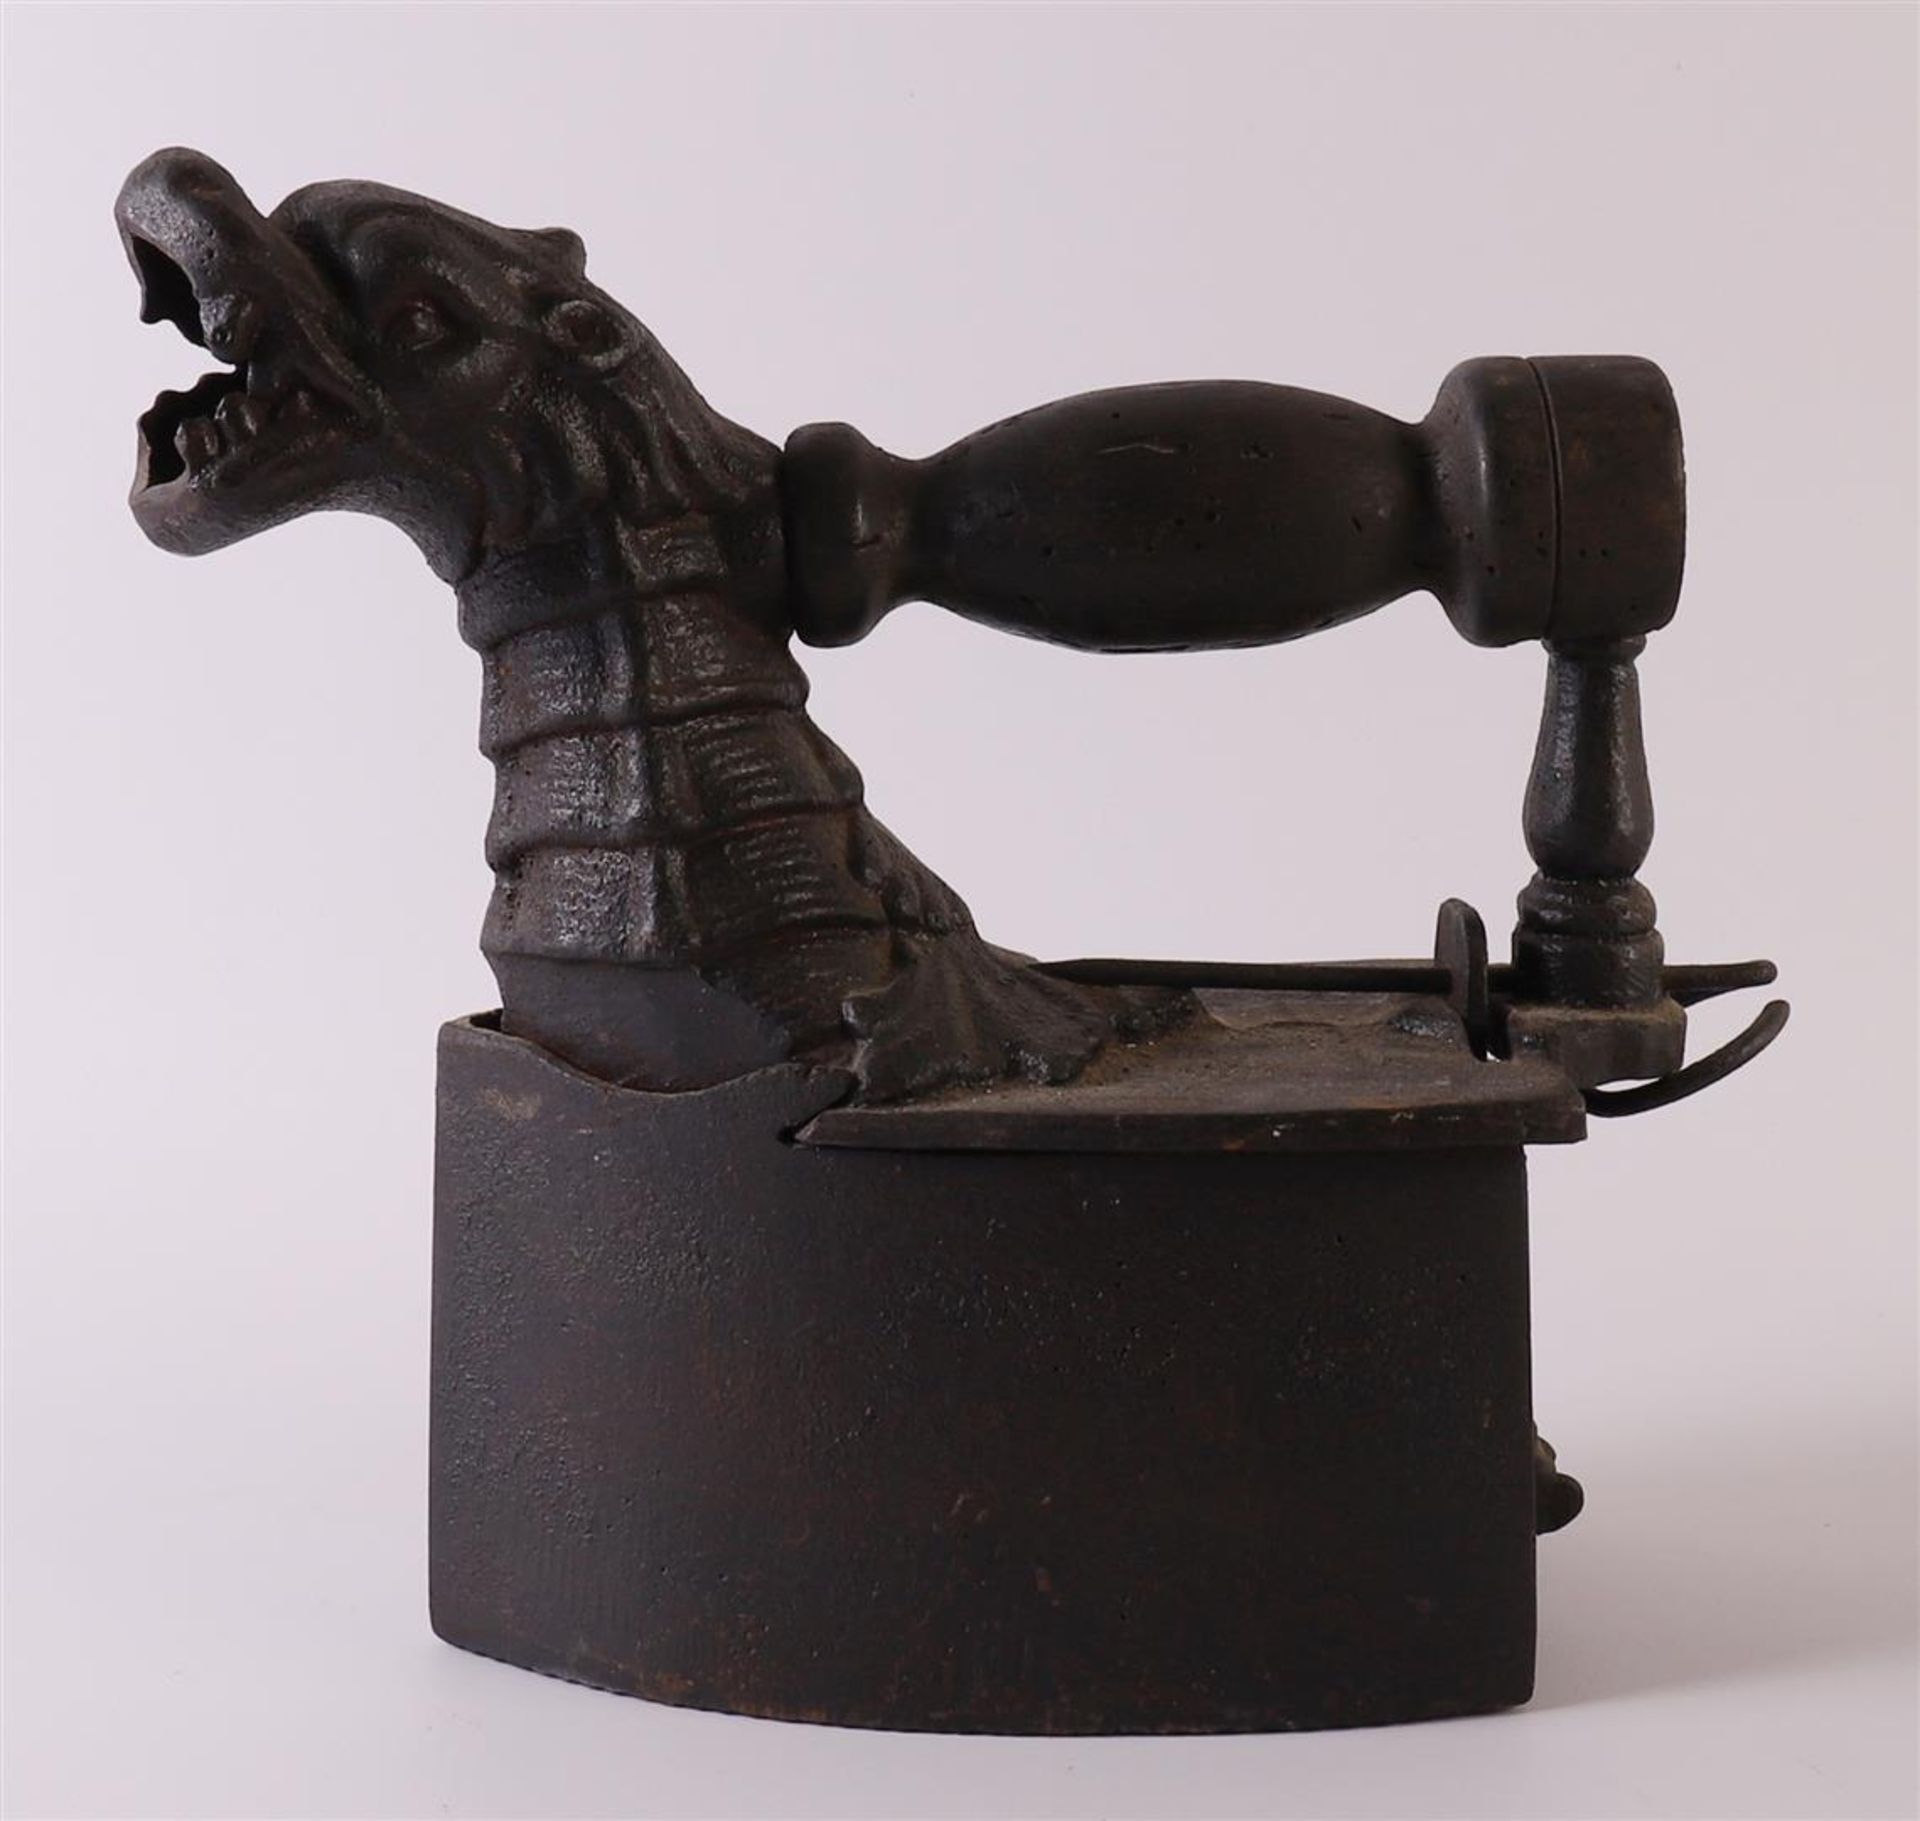 A bronze pan on tripod, 18th century, h 10 x Ø 24 cm (without stem). Here is a cast iron coal - Image 4 of 7